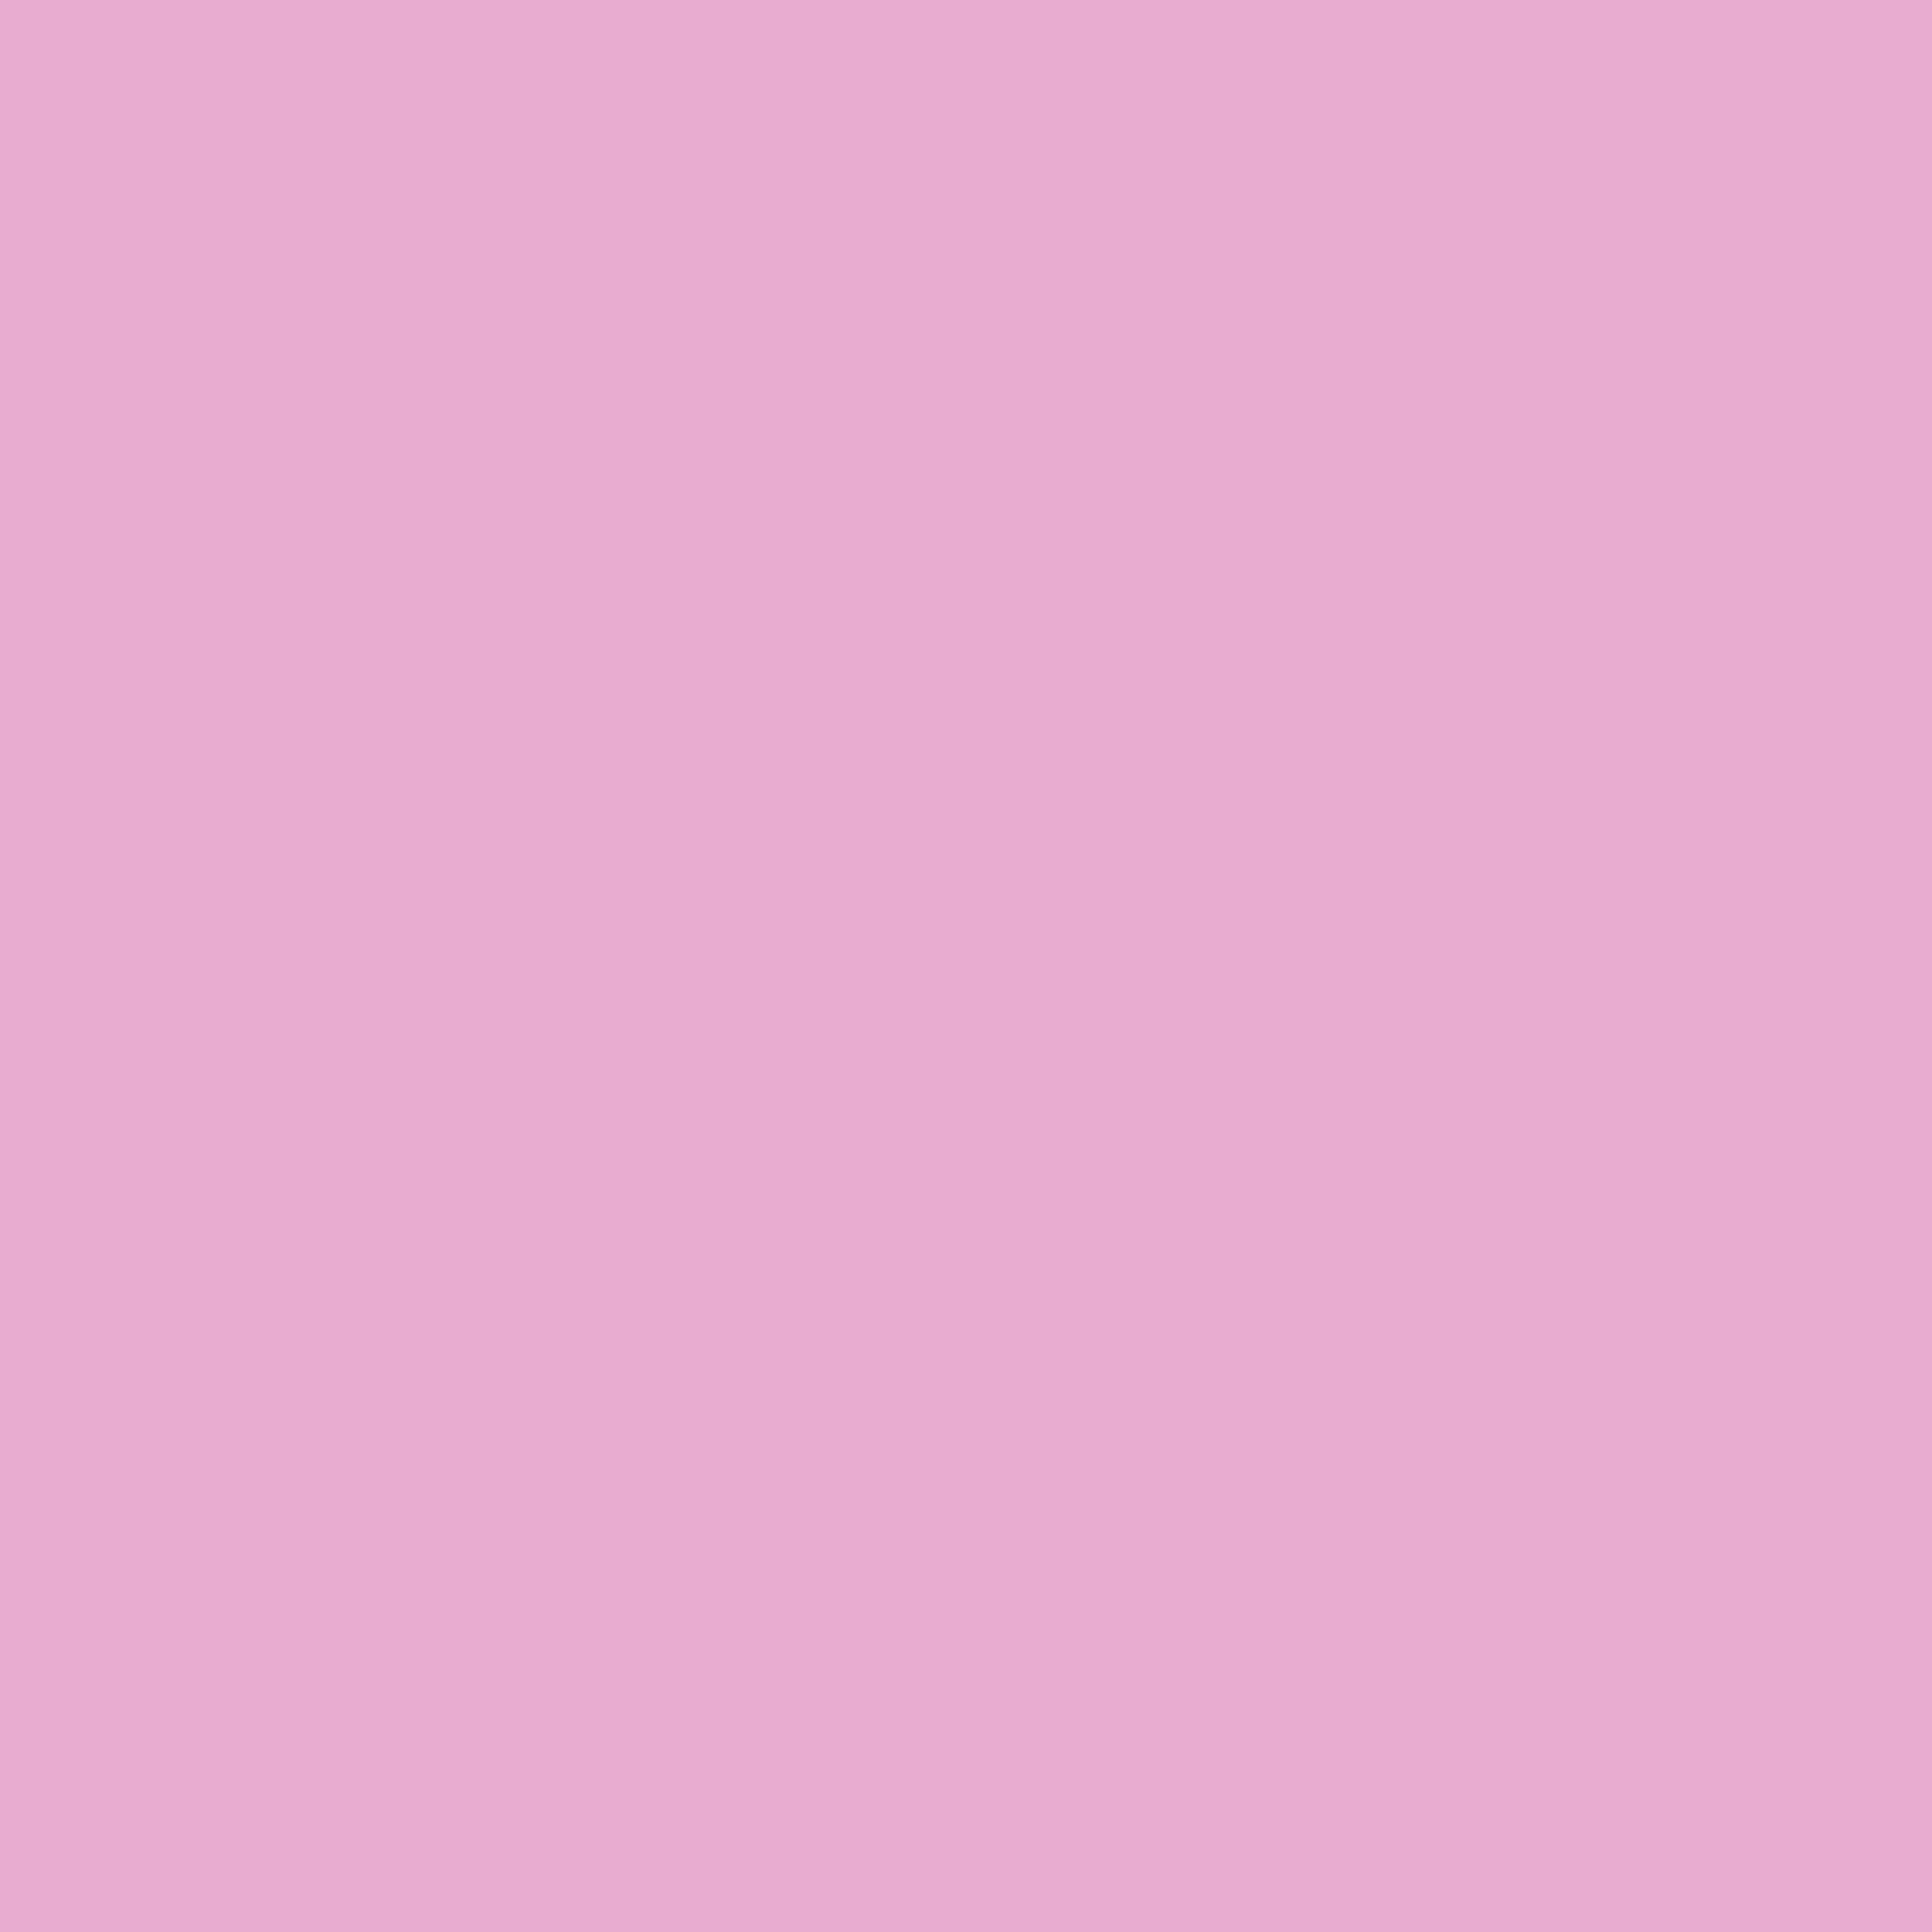 2732x2732 Pink Pearl Solid Color Background